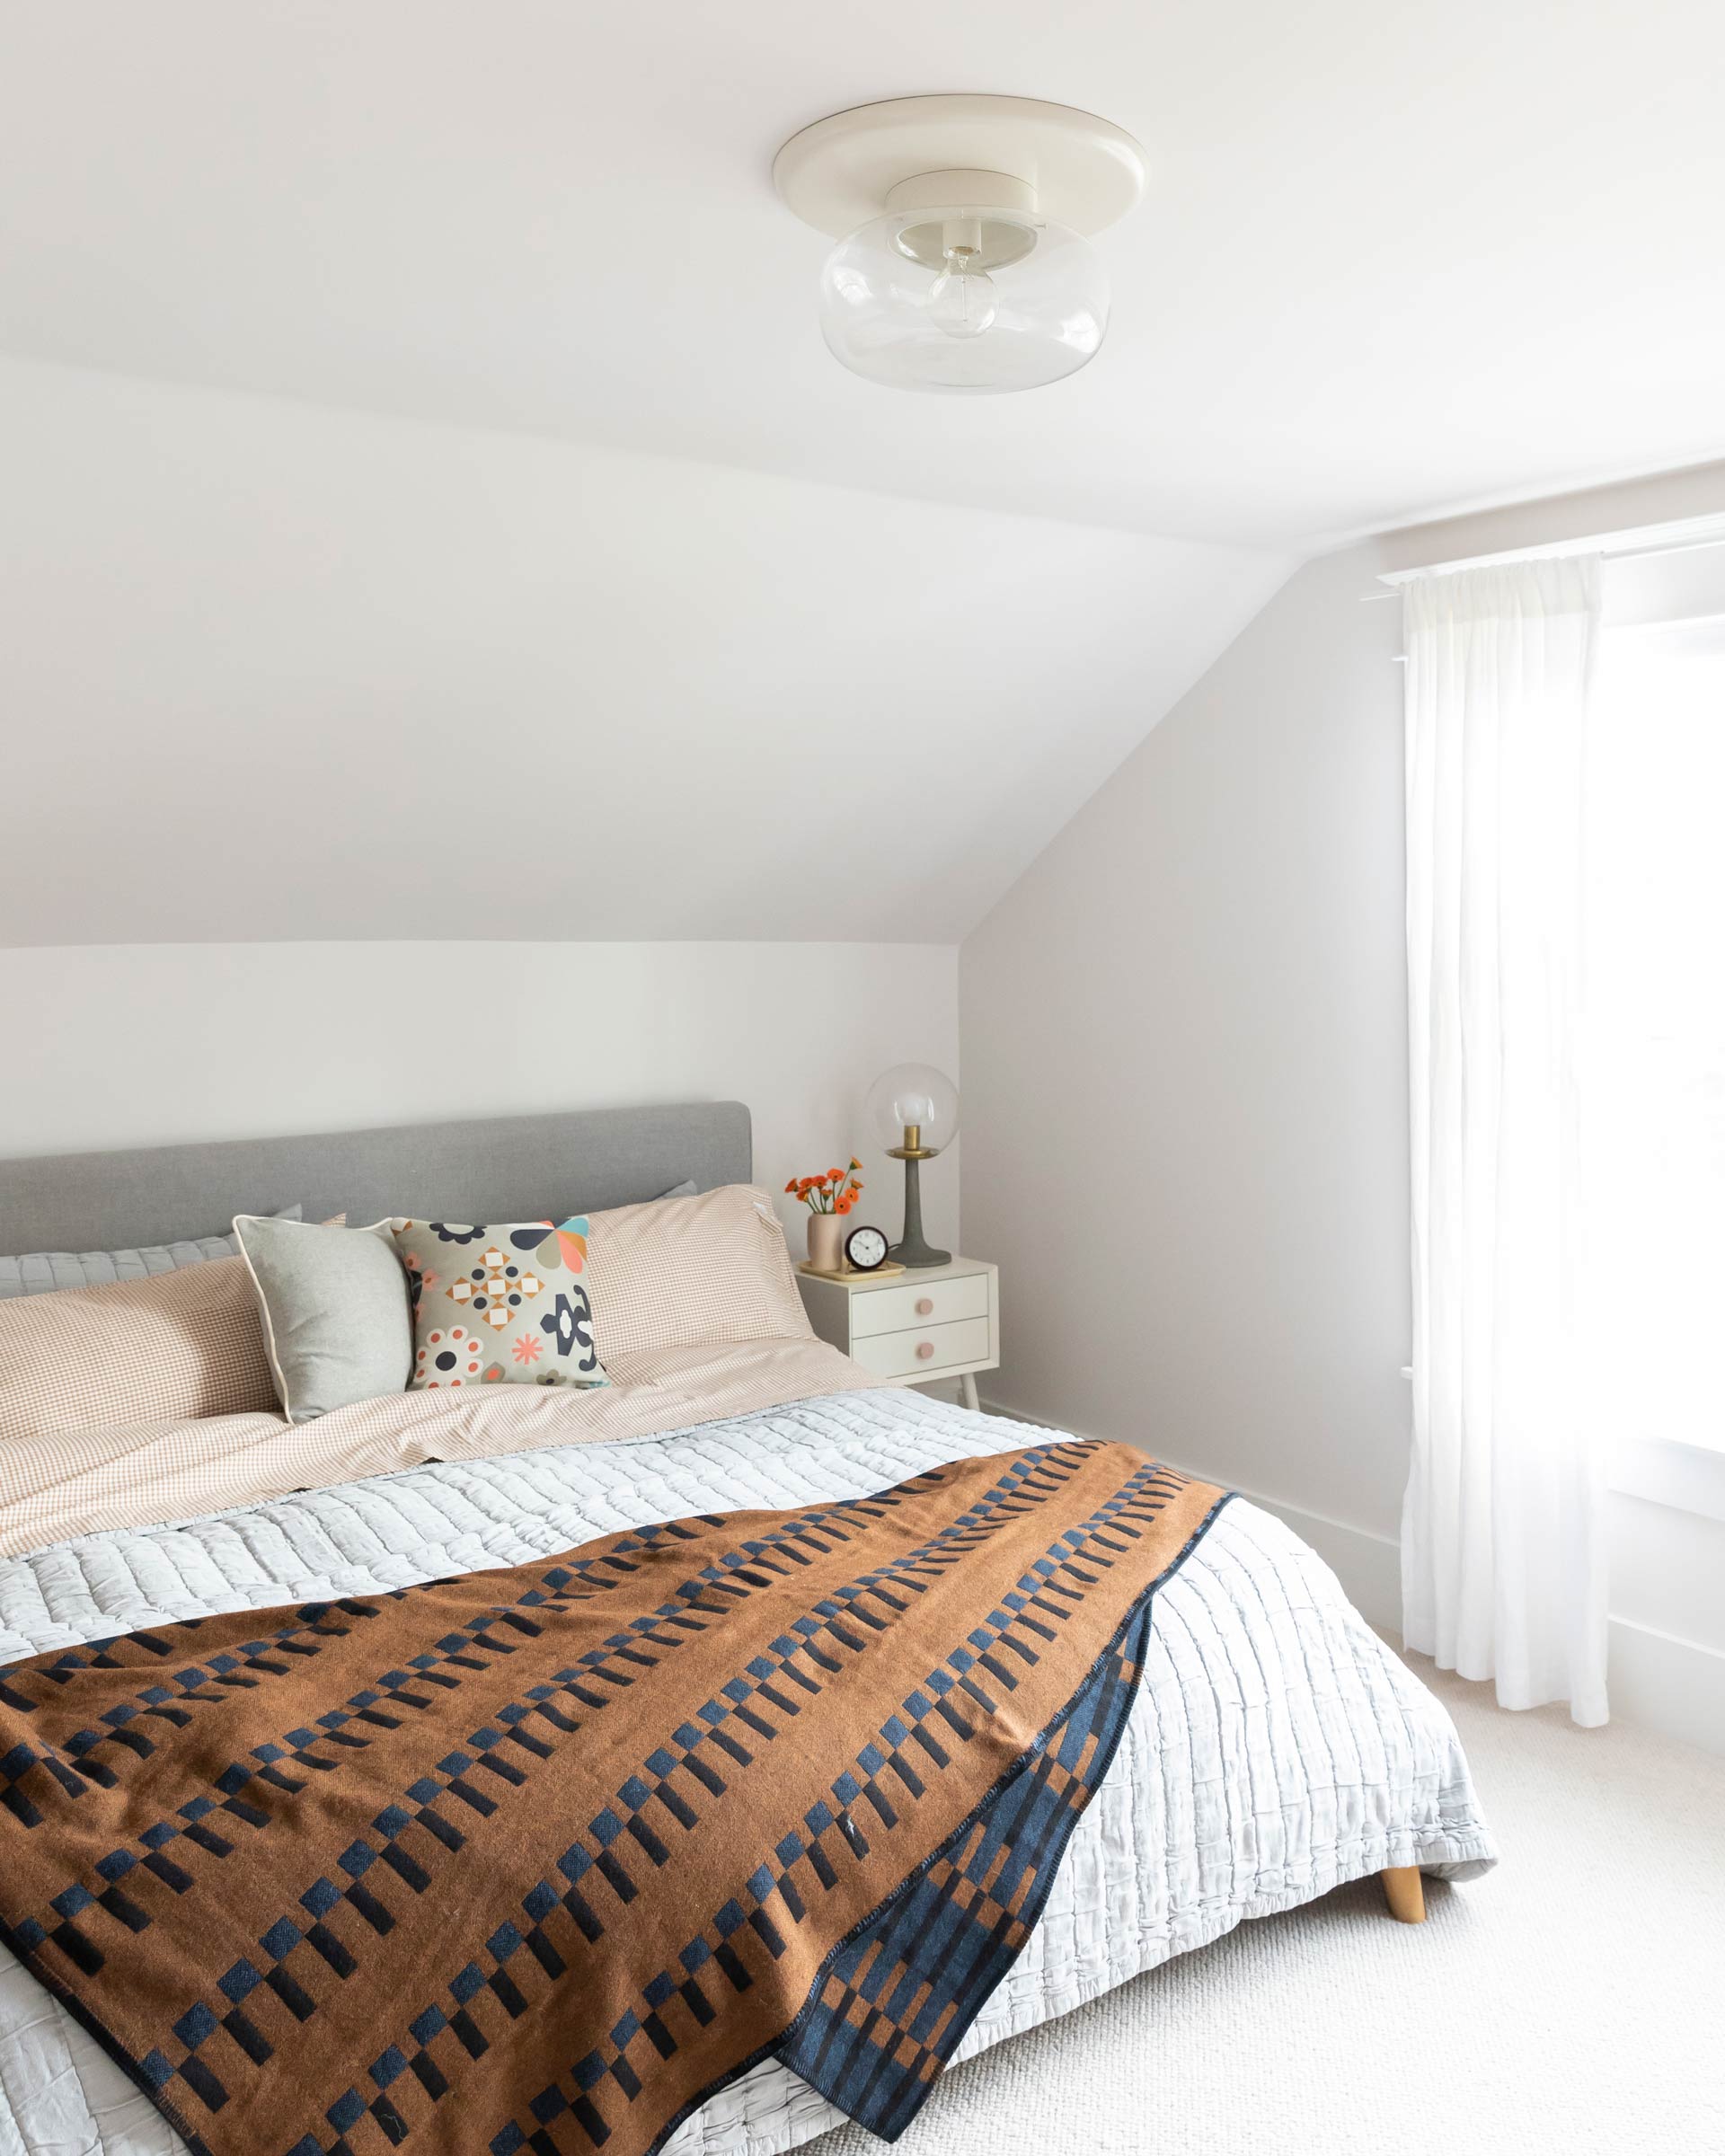 Bright bedroom with an Eleanor Pritchard throw blanket and cozy bedding.